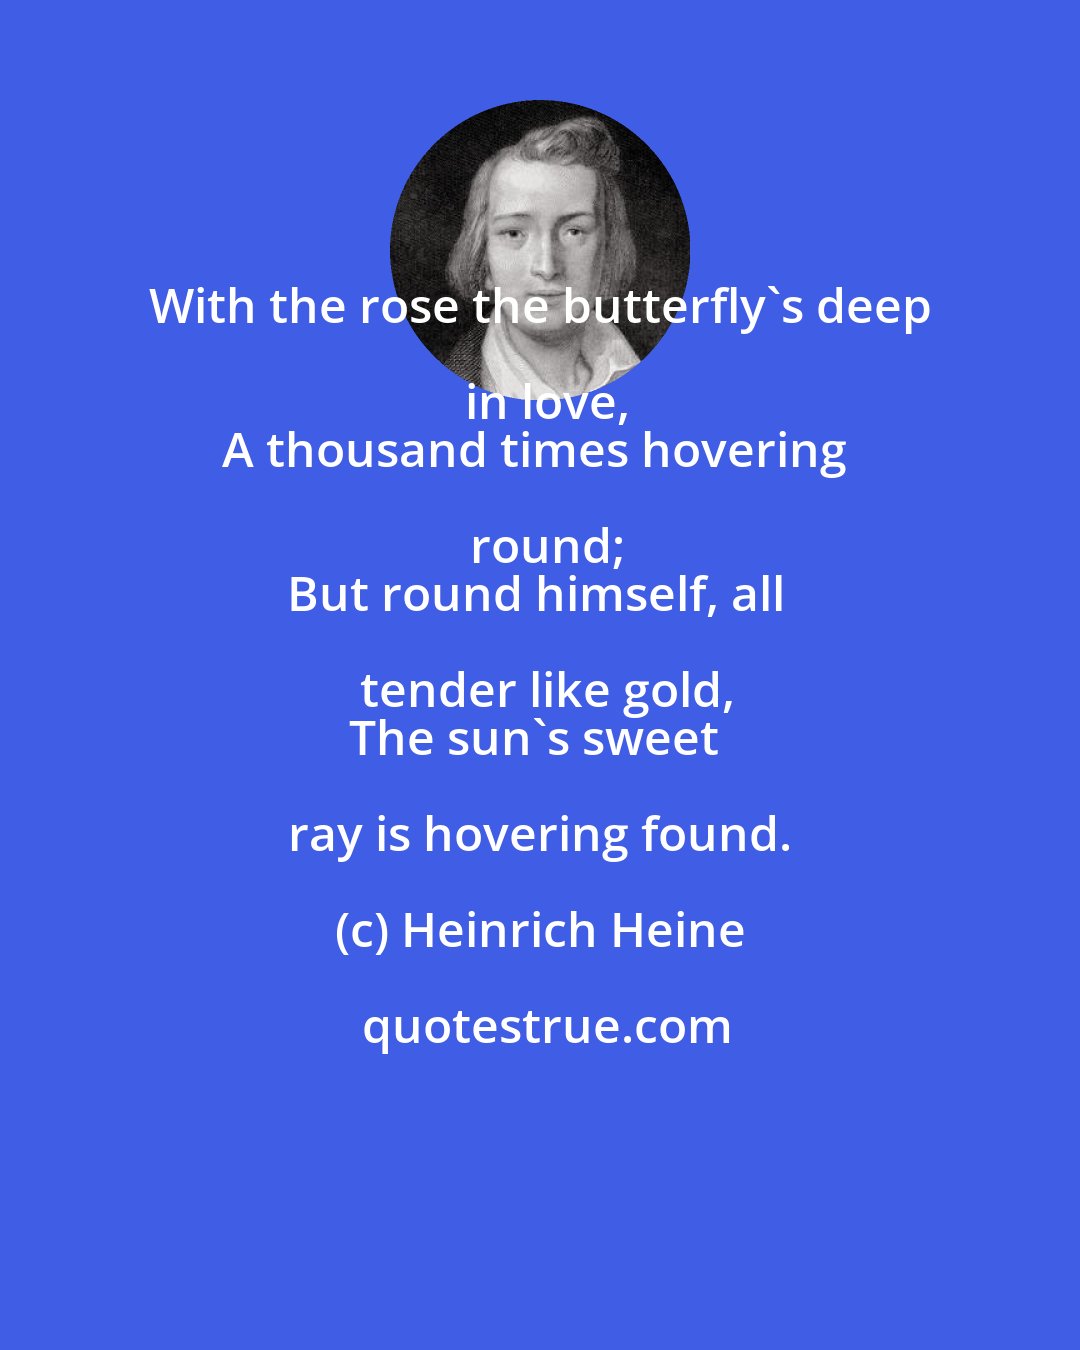 Heinrich Heine: With the rose the butterfly's deep in love,
A thousand times hovering round;
But round himself, all tender like gold,
The sun's sweet ray is hovering found.